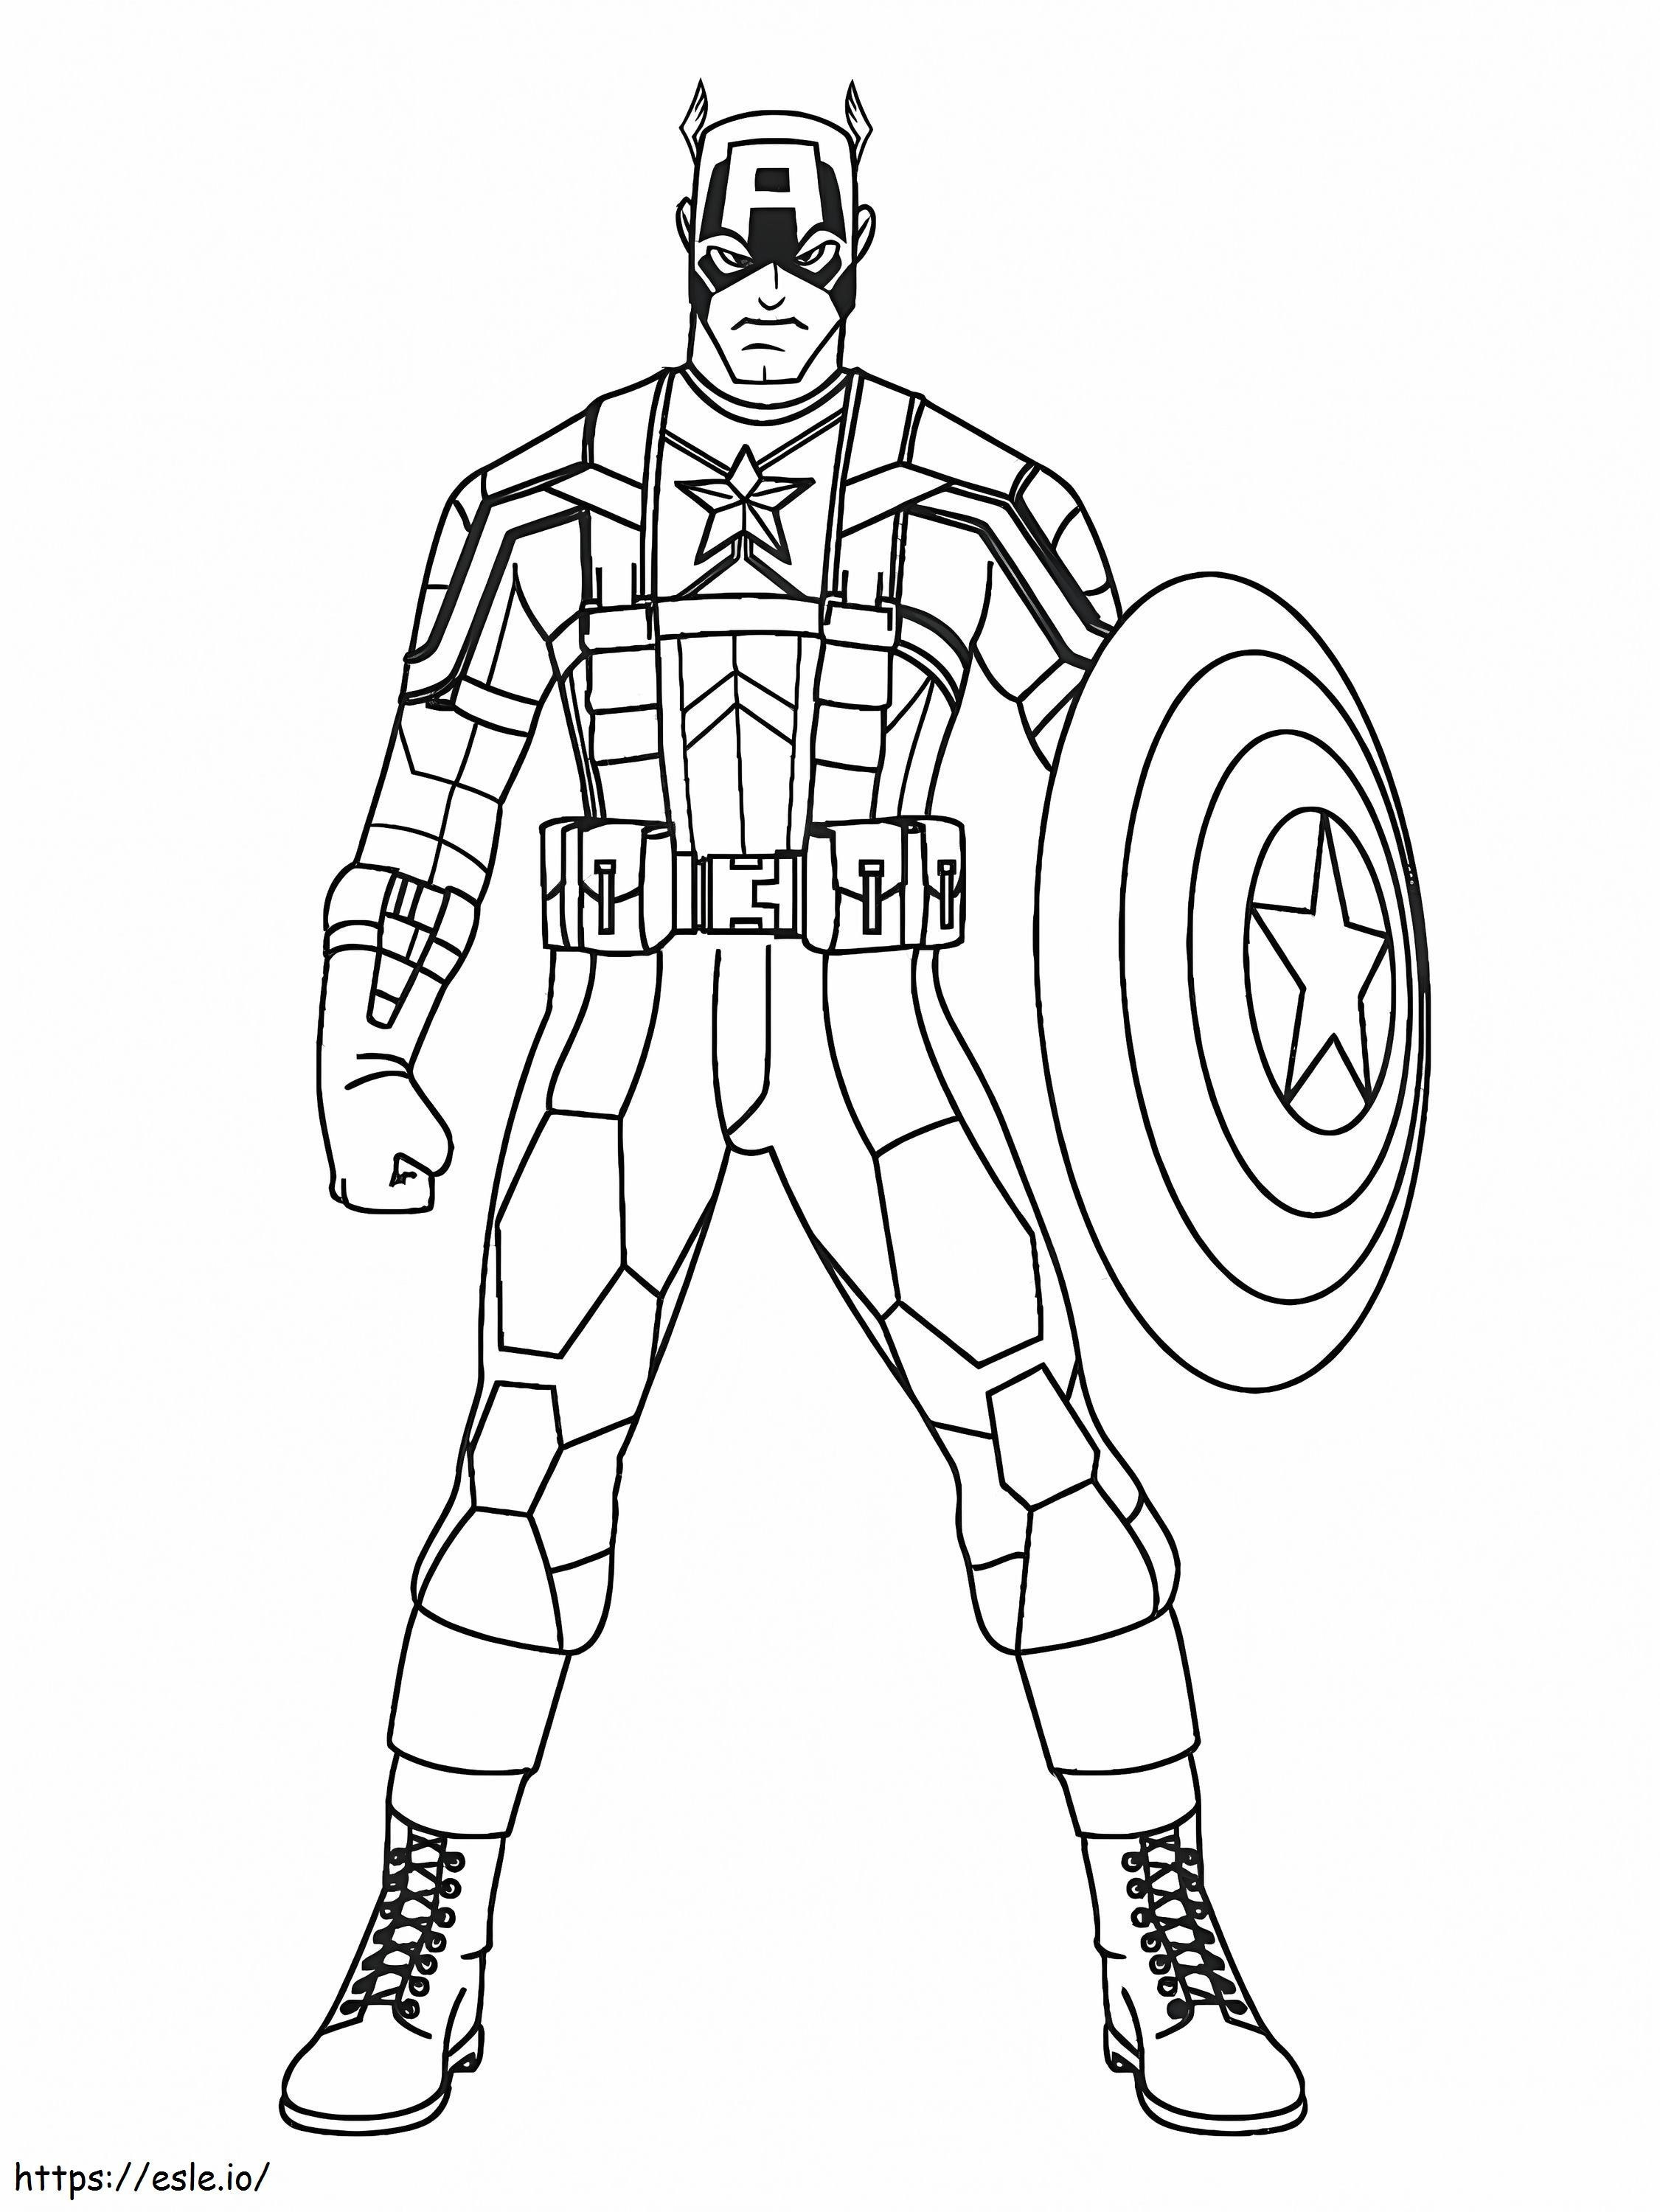 Captain America Amazing coloring page